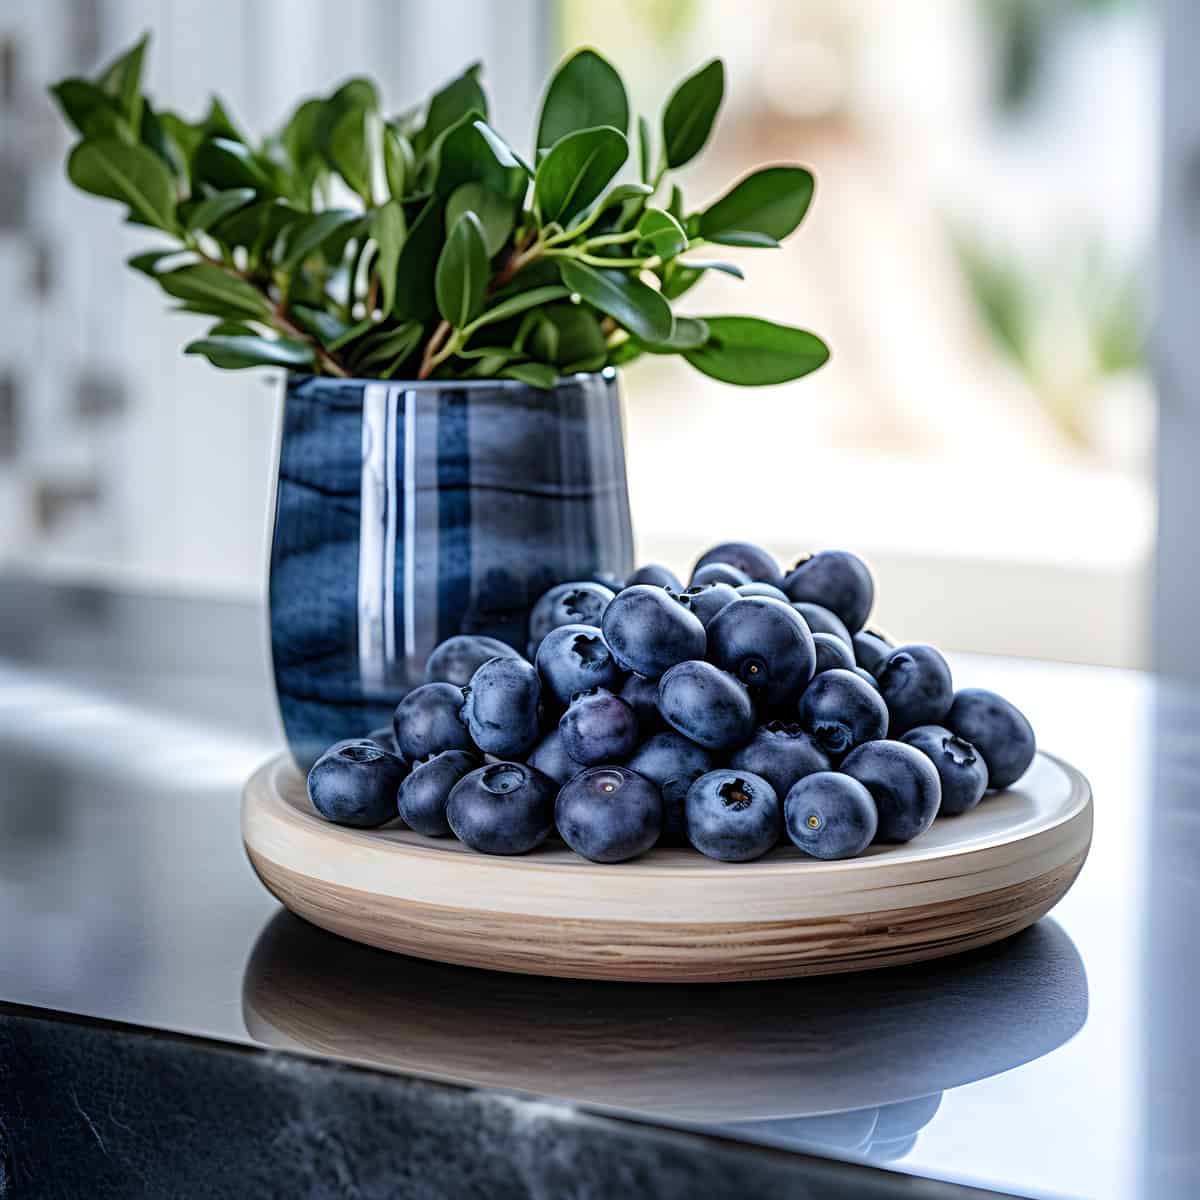 Blueberries on a kitchen counter